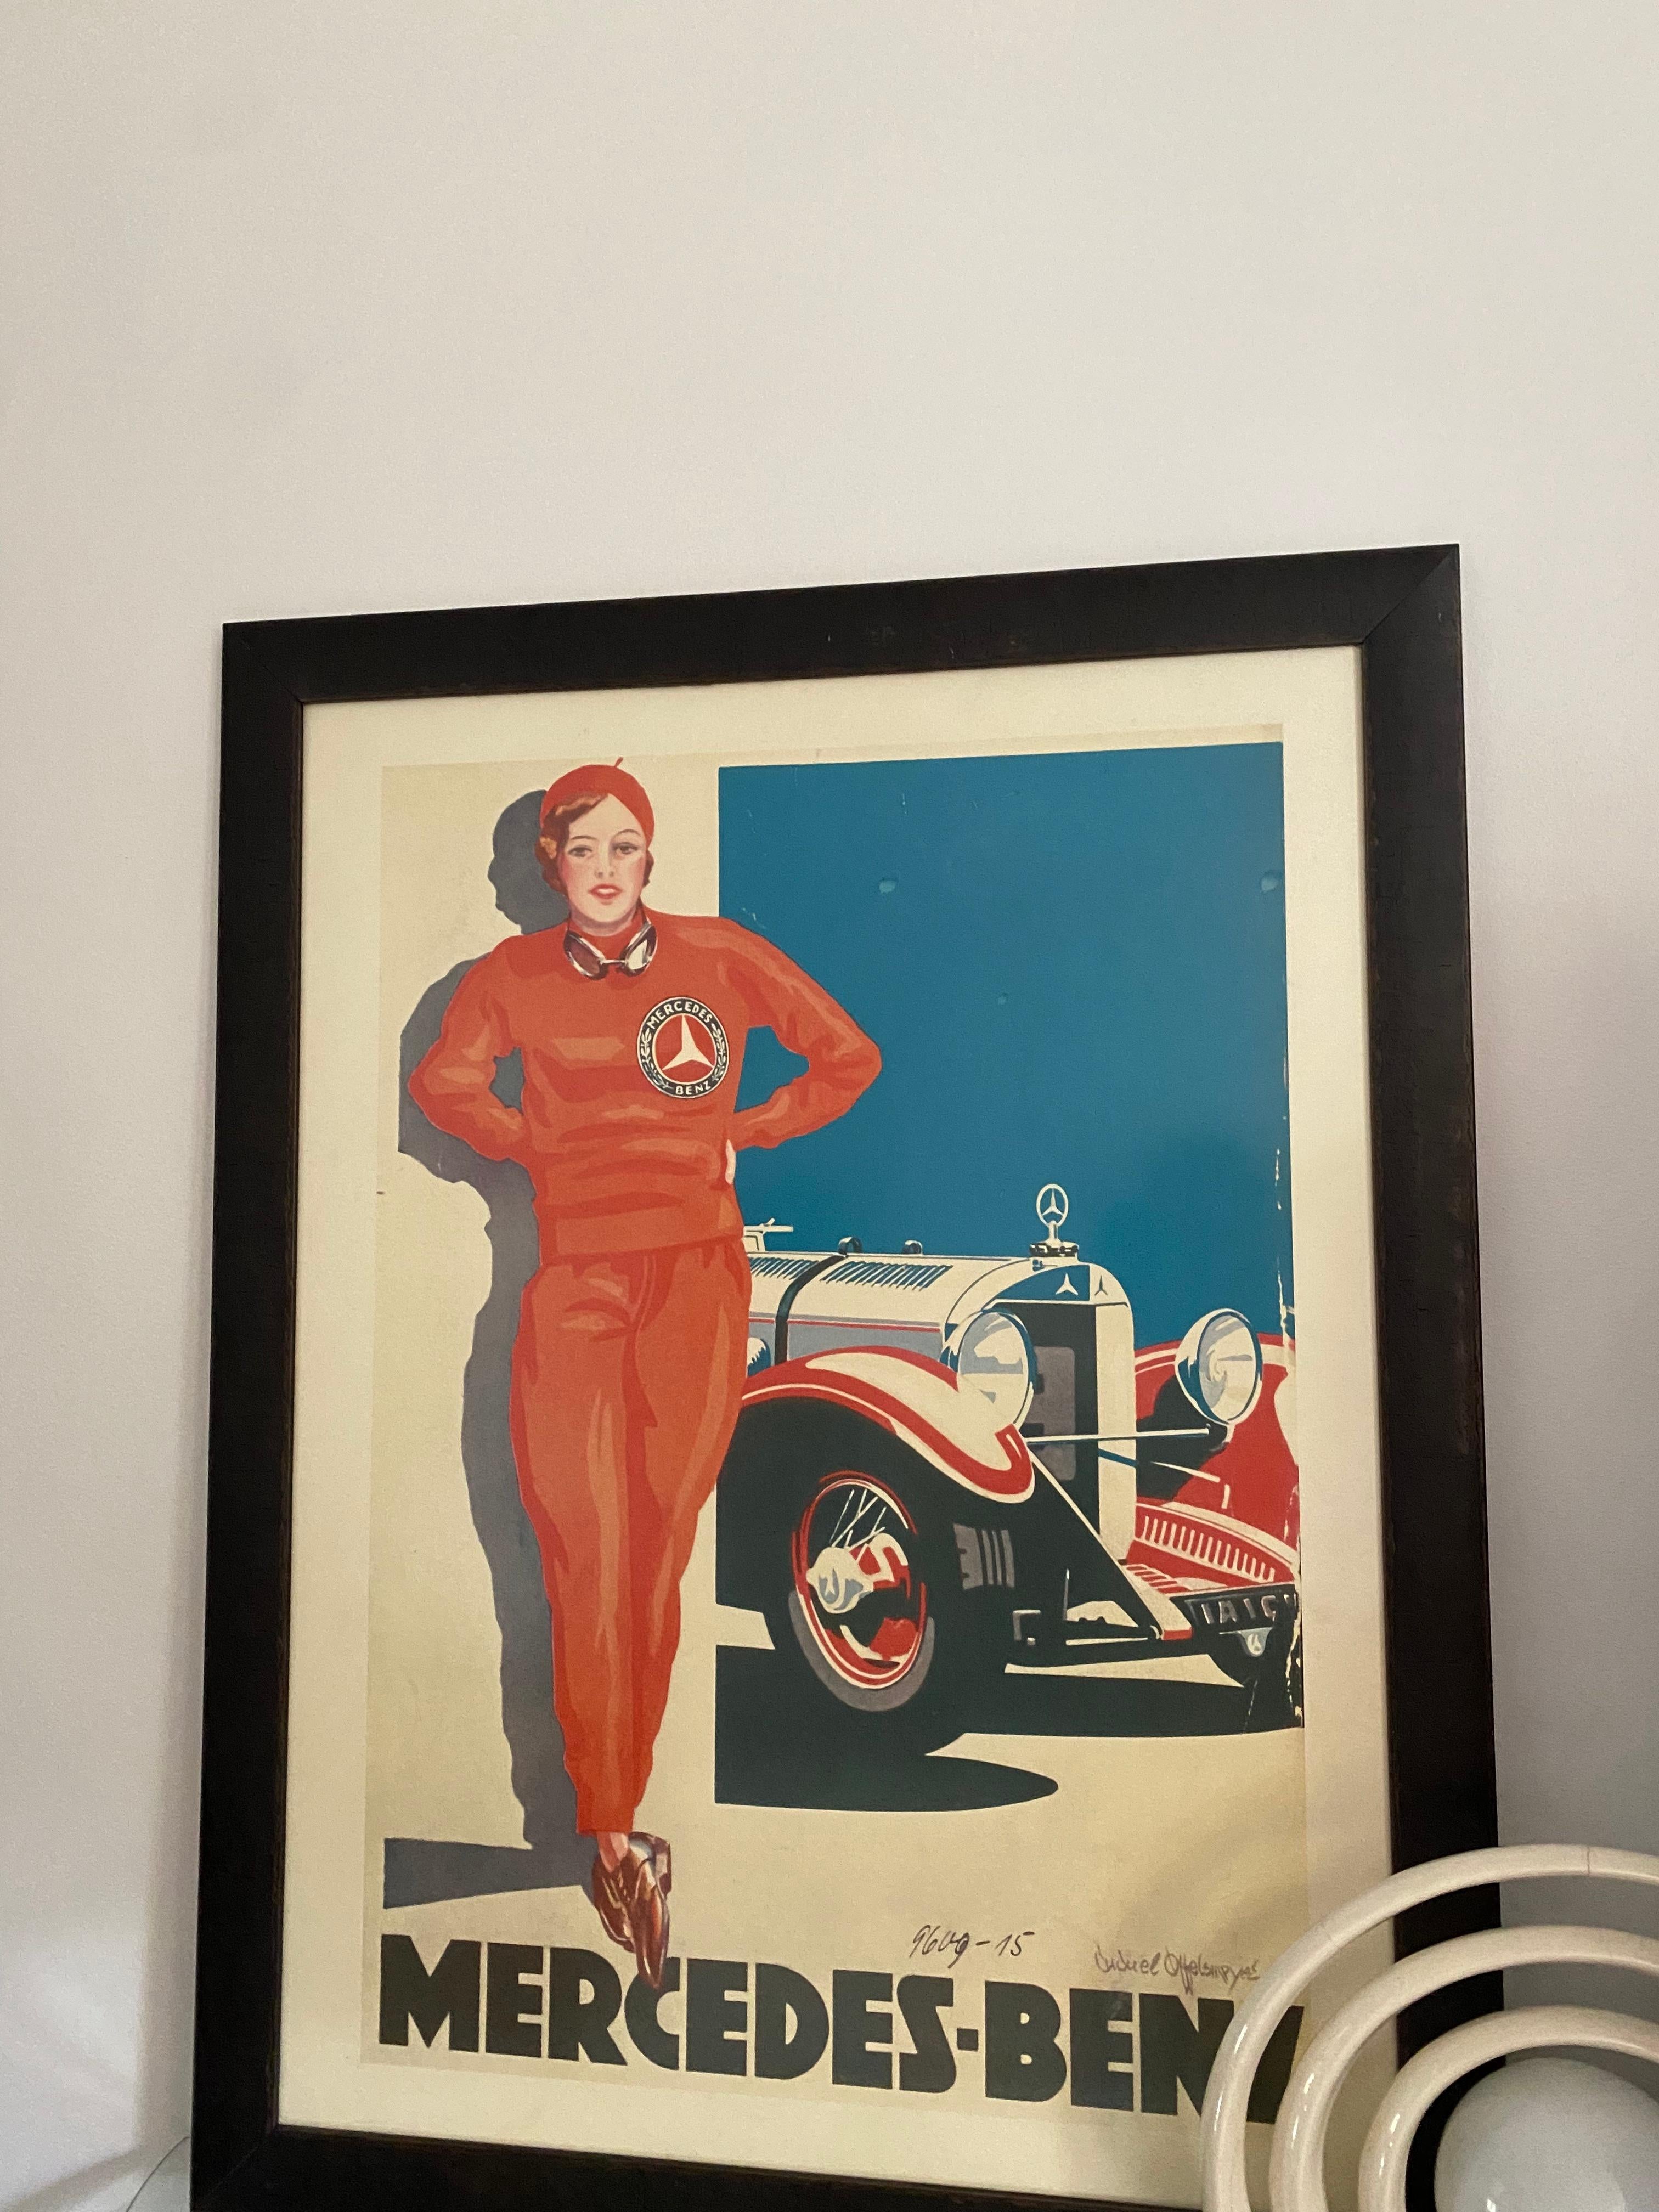 Vintage Mercedez-Benz Advert 1920s Lady in Red  In Good Condition For Sale In Forest Hills, NY